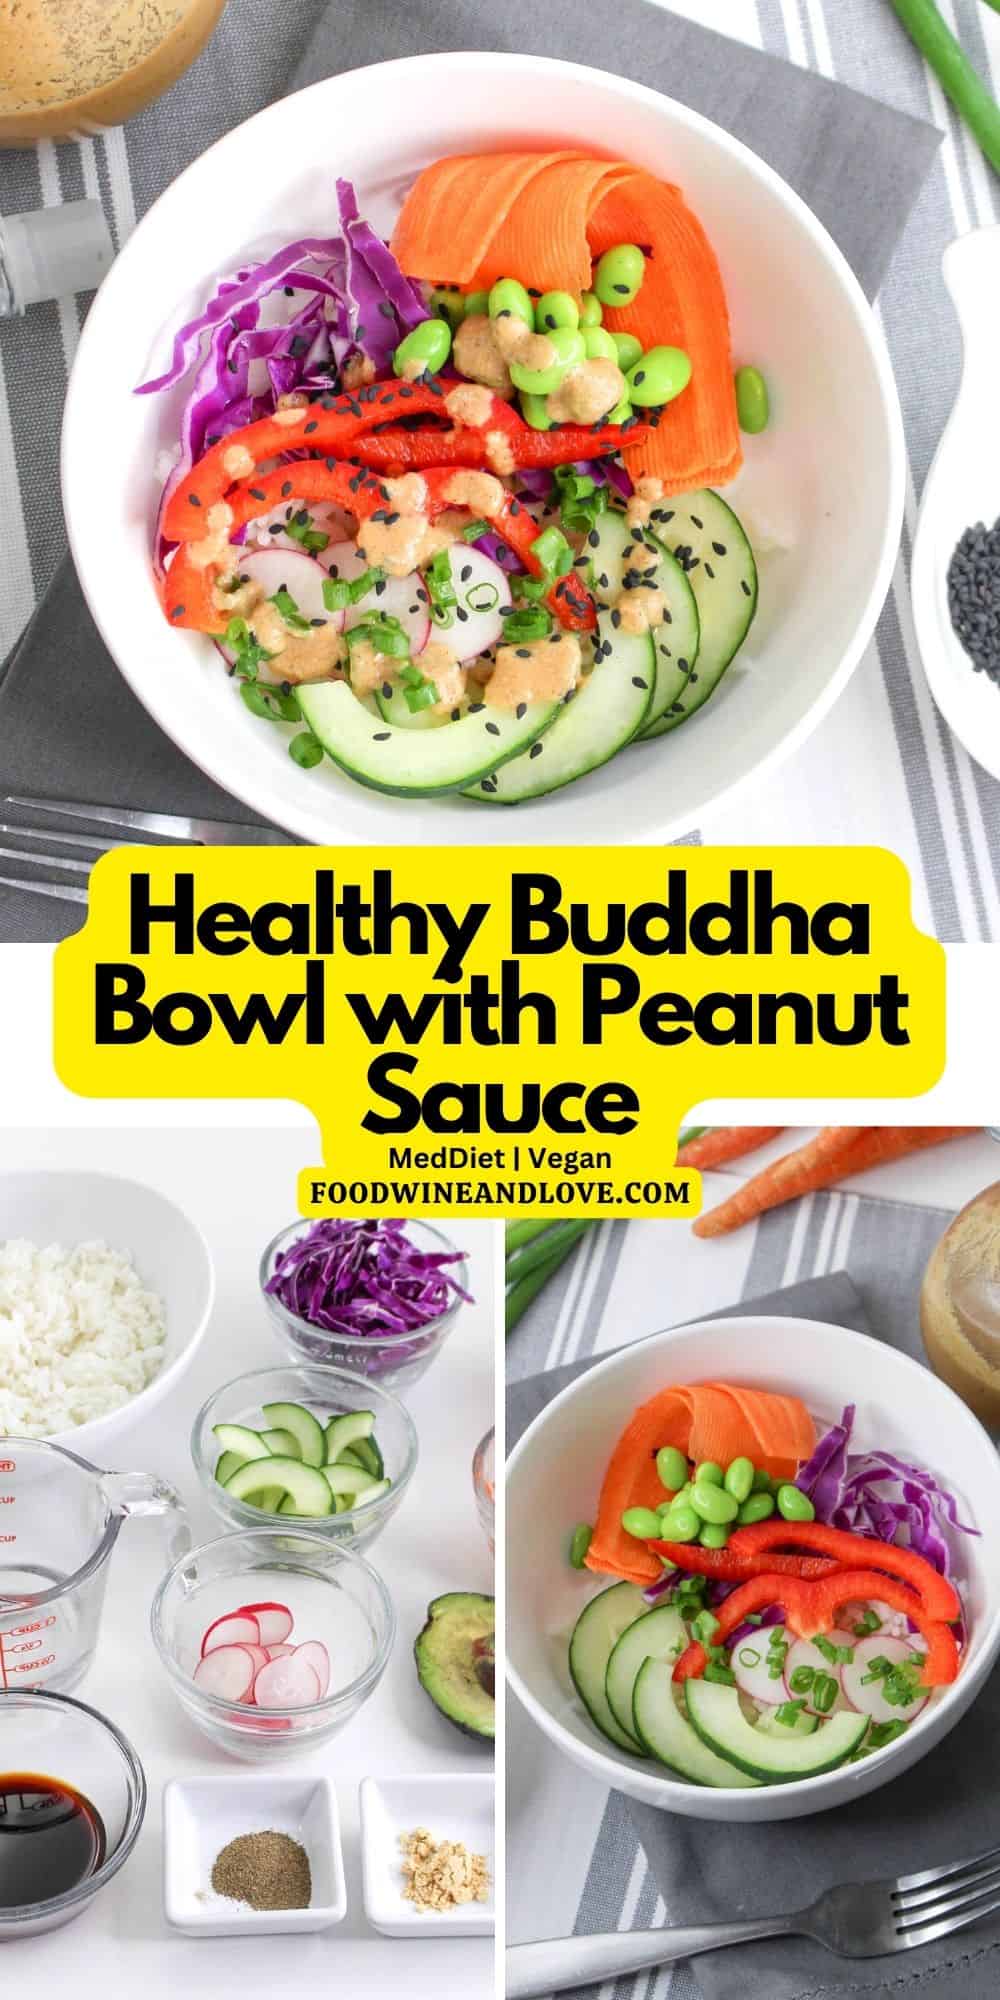 Healthy Buddha Bowl with Peanut Sauce, a simple and delicious recipe made with fresh ingredients. Vegan, Vegetarian, Mediterranean diet.